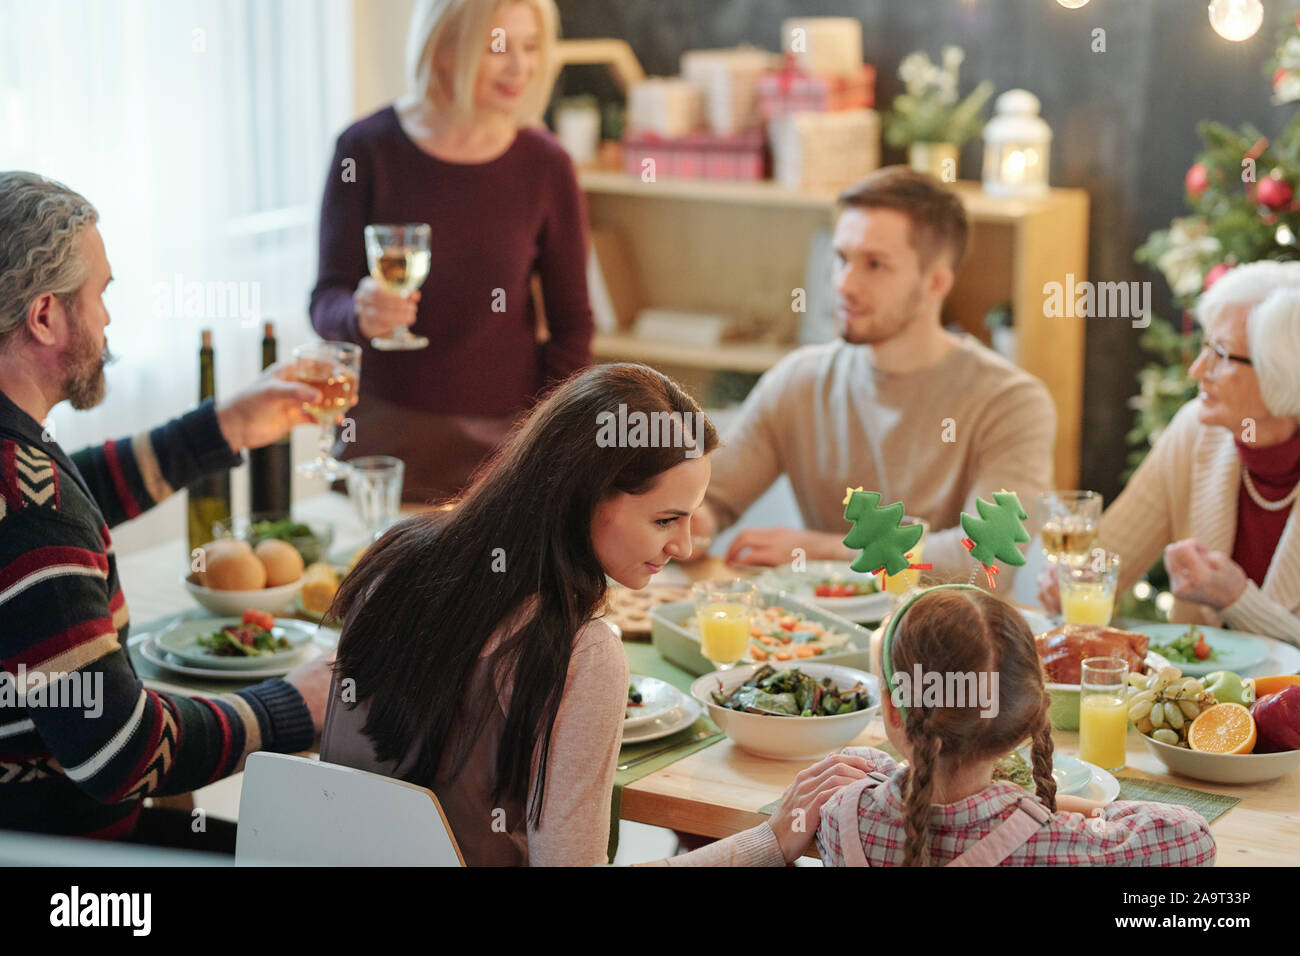 Young mother and her little daughter sitting close to each other by served table Stock Photo